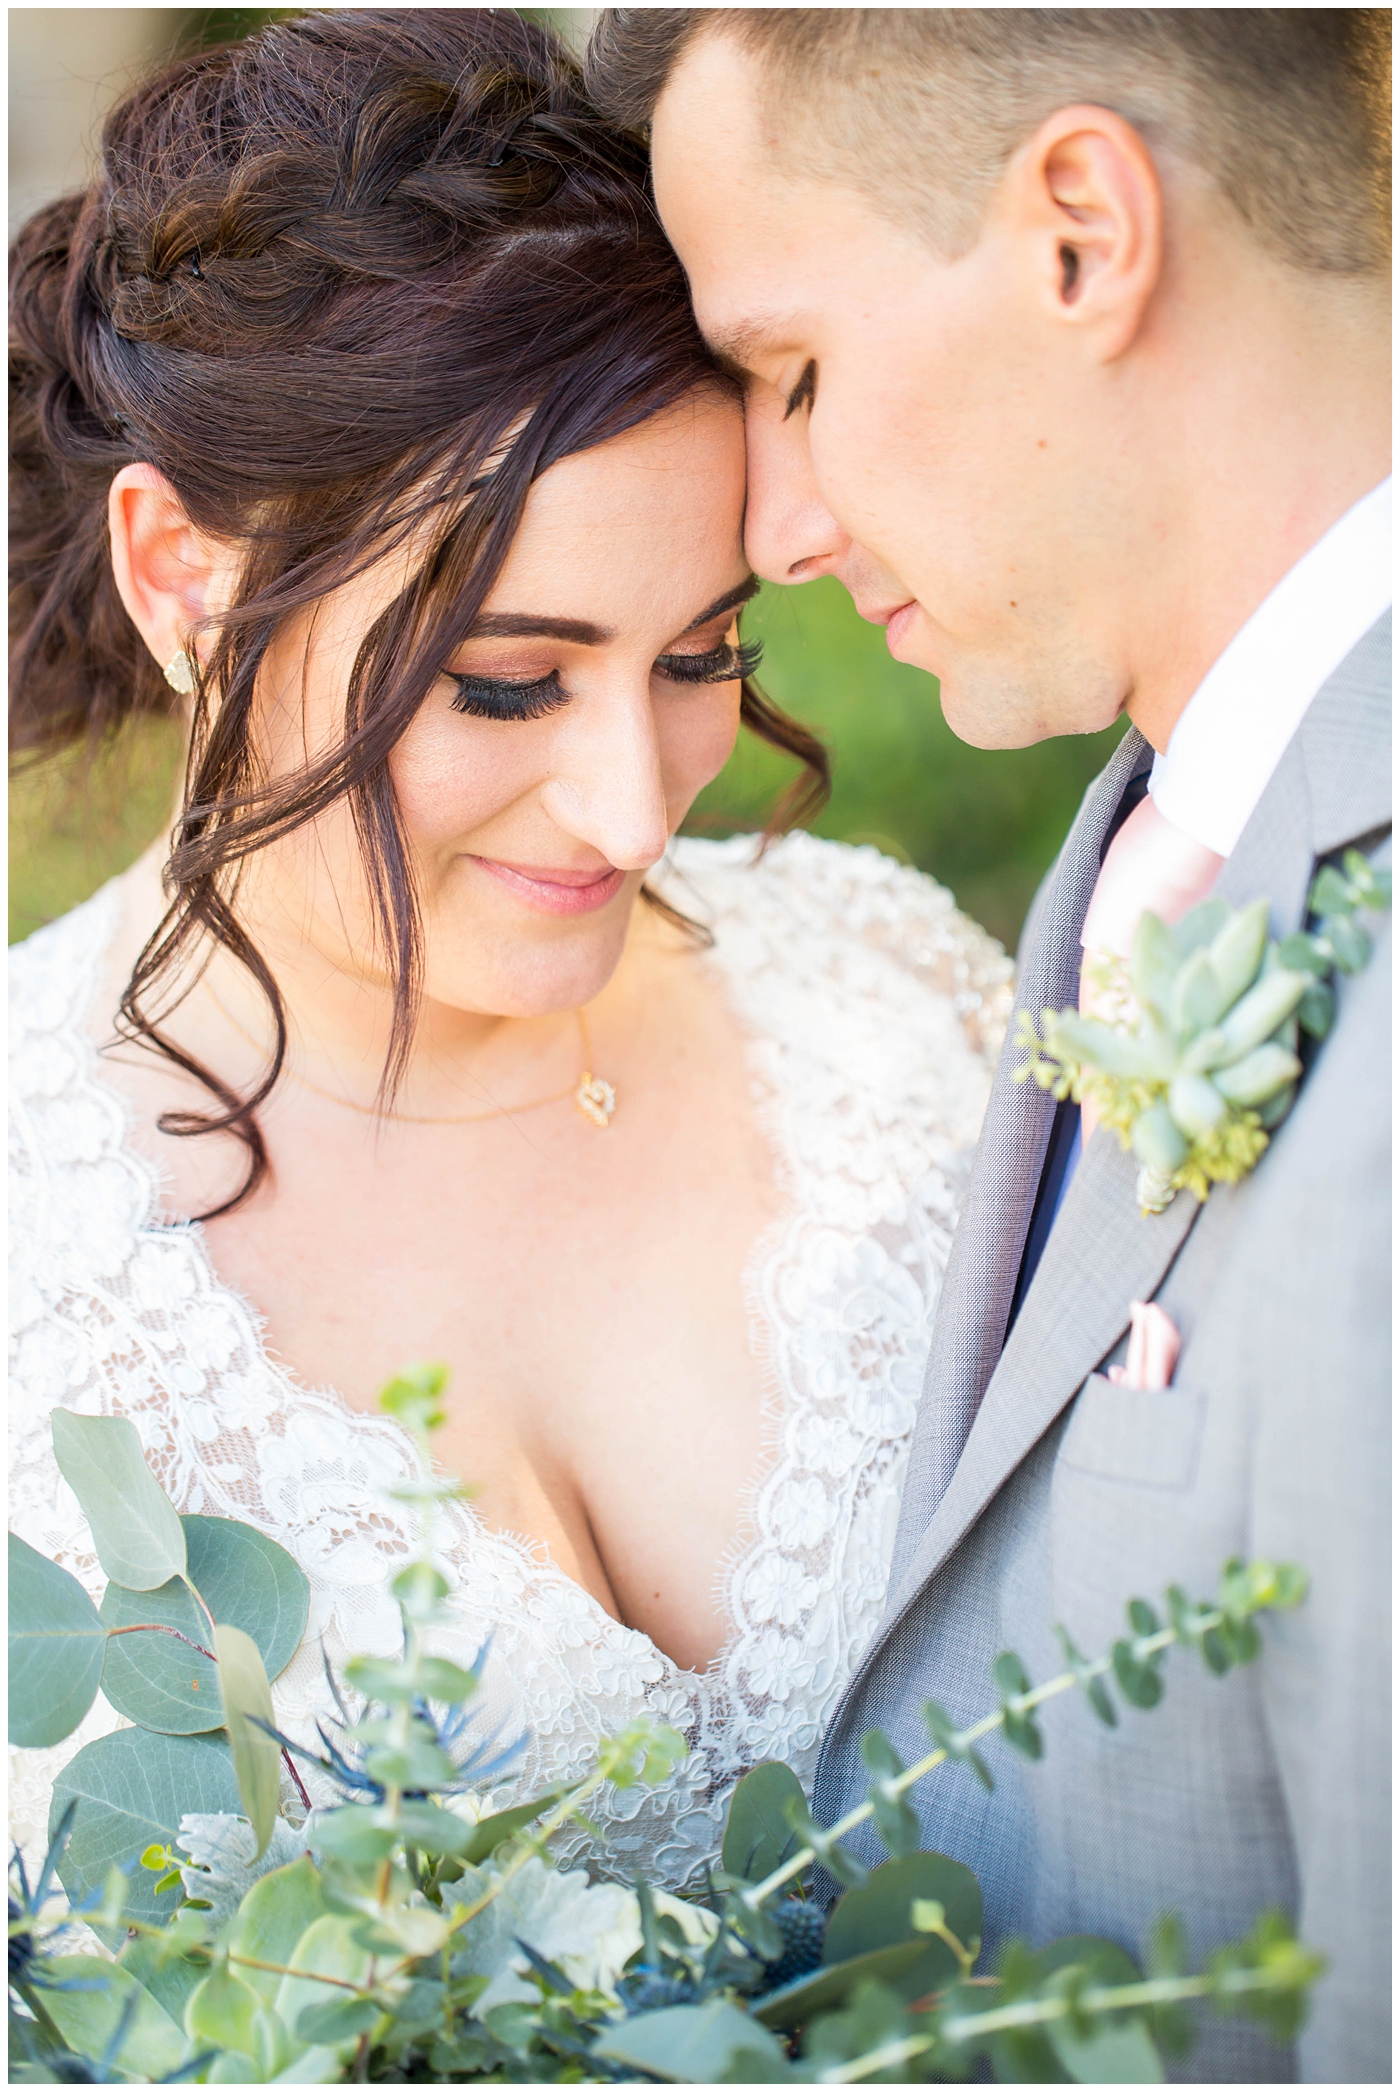 Bride in sleeved white dress and groom in gray jacket